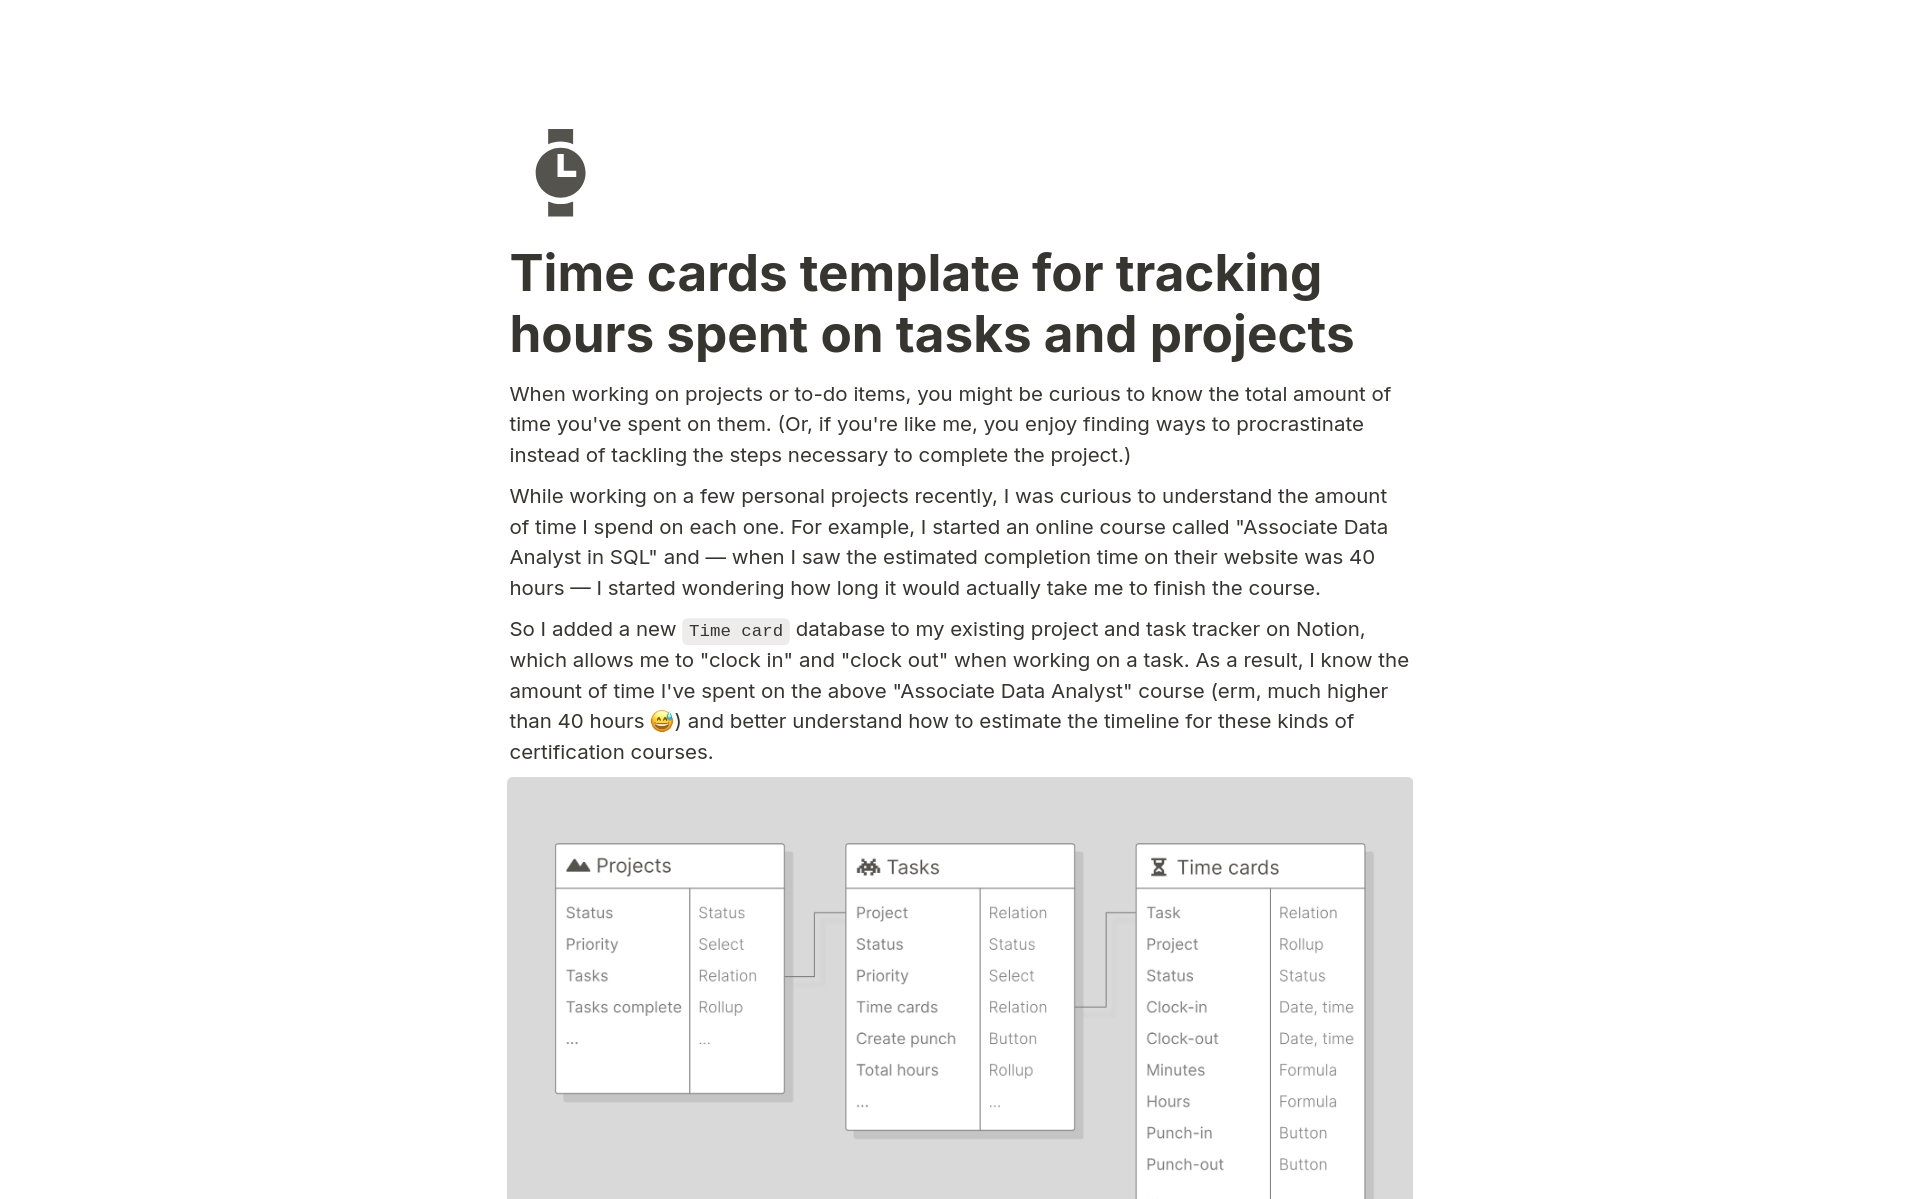 Time cards for tracking hours spent on projects님의 템플릿 미리보기